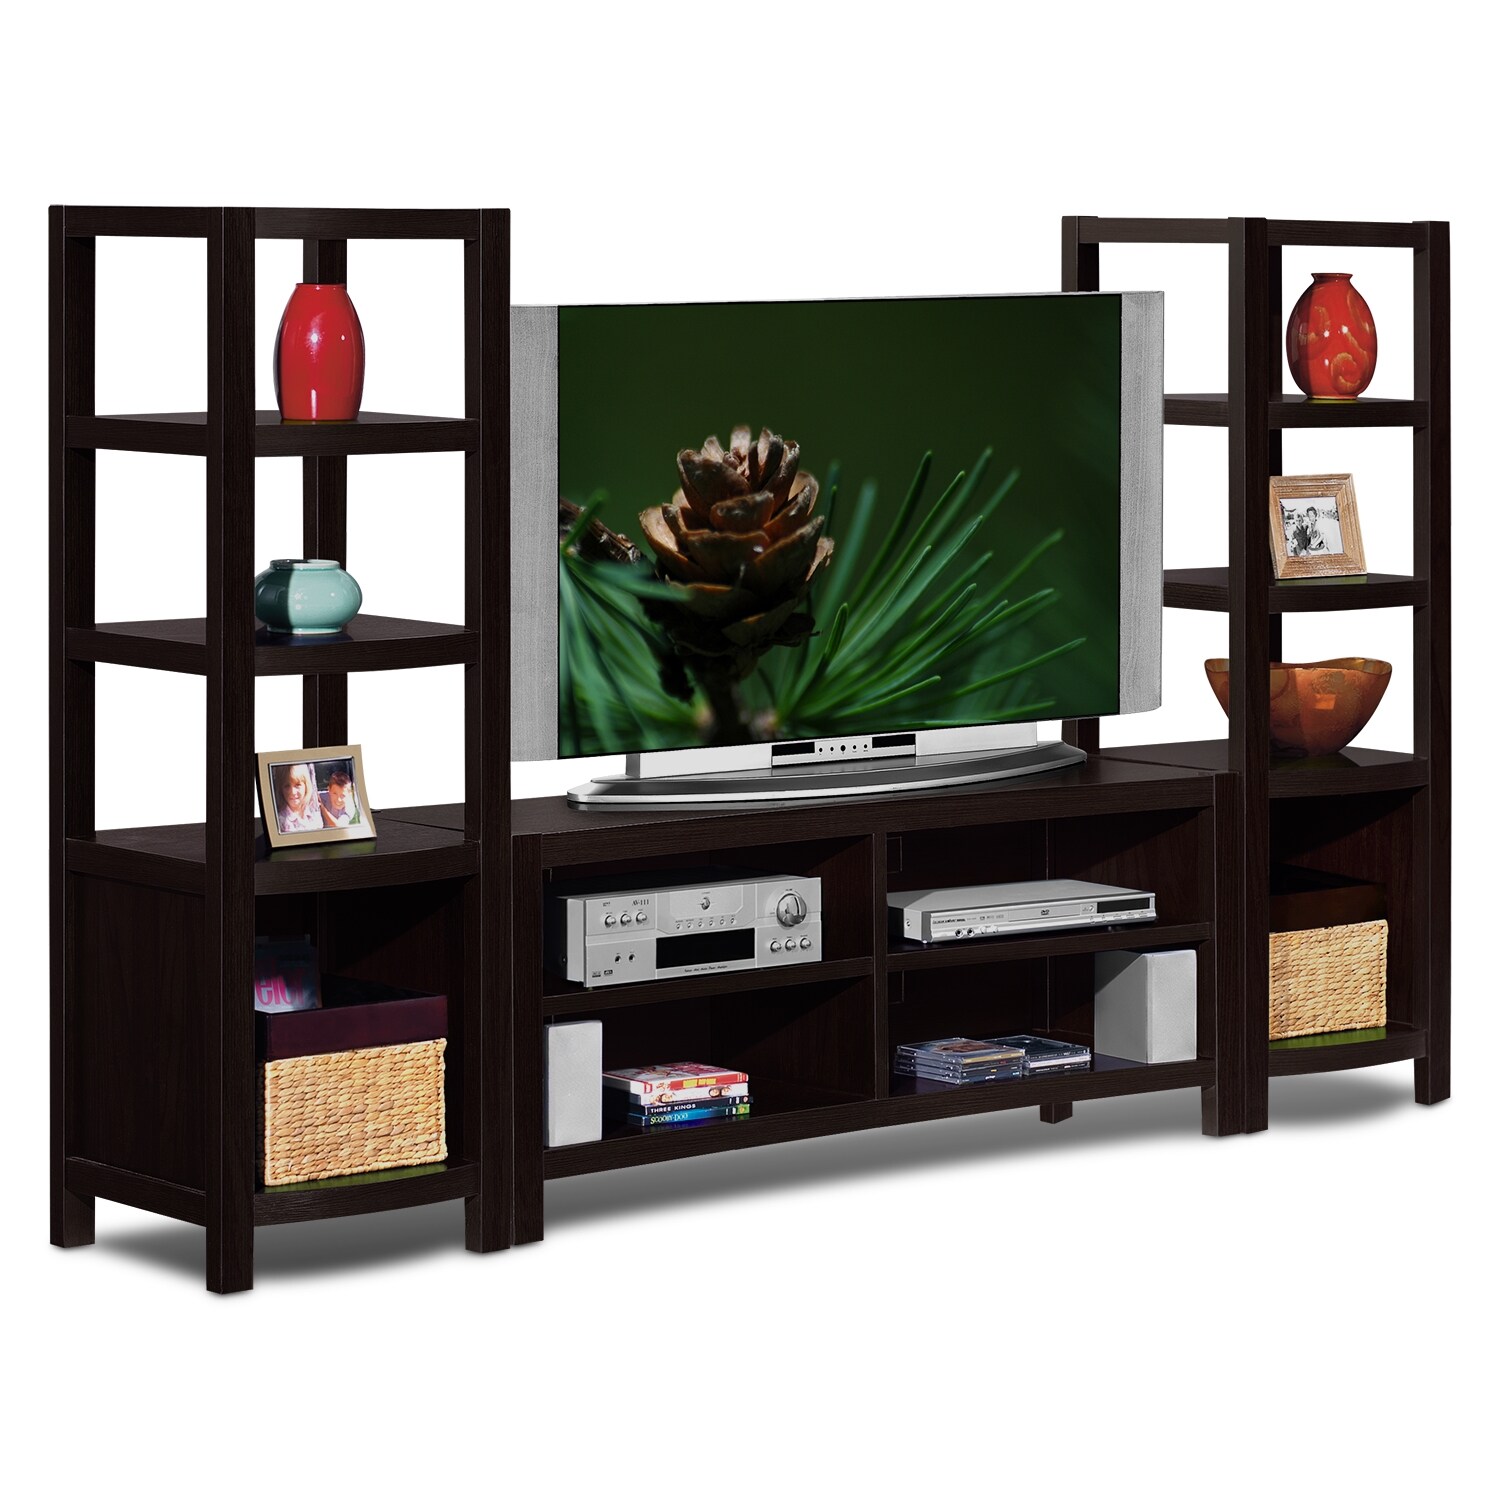 Townsend 3 Pc. Entertainment Wall Unit Value City Furniture